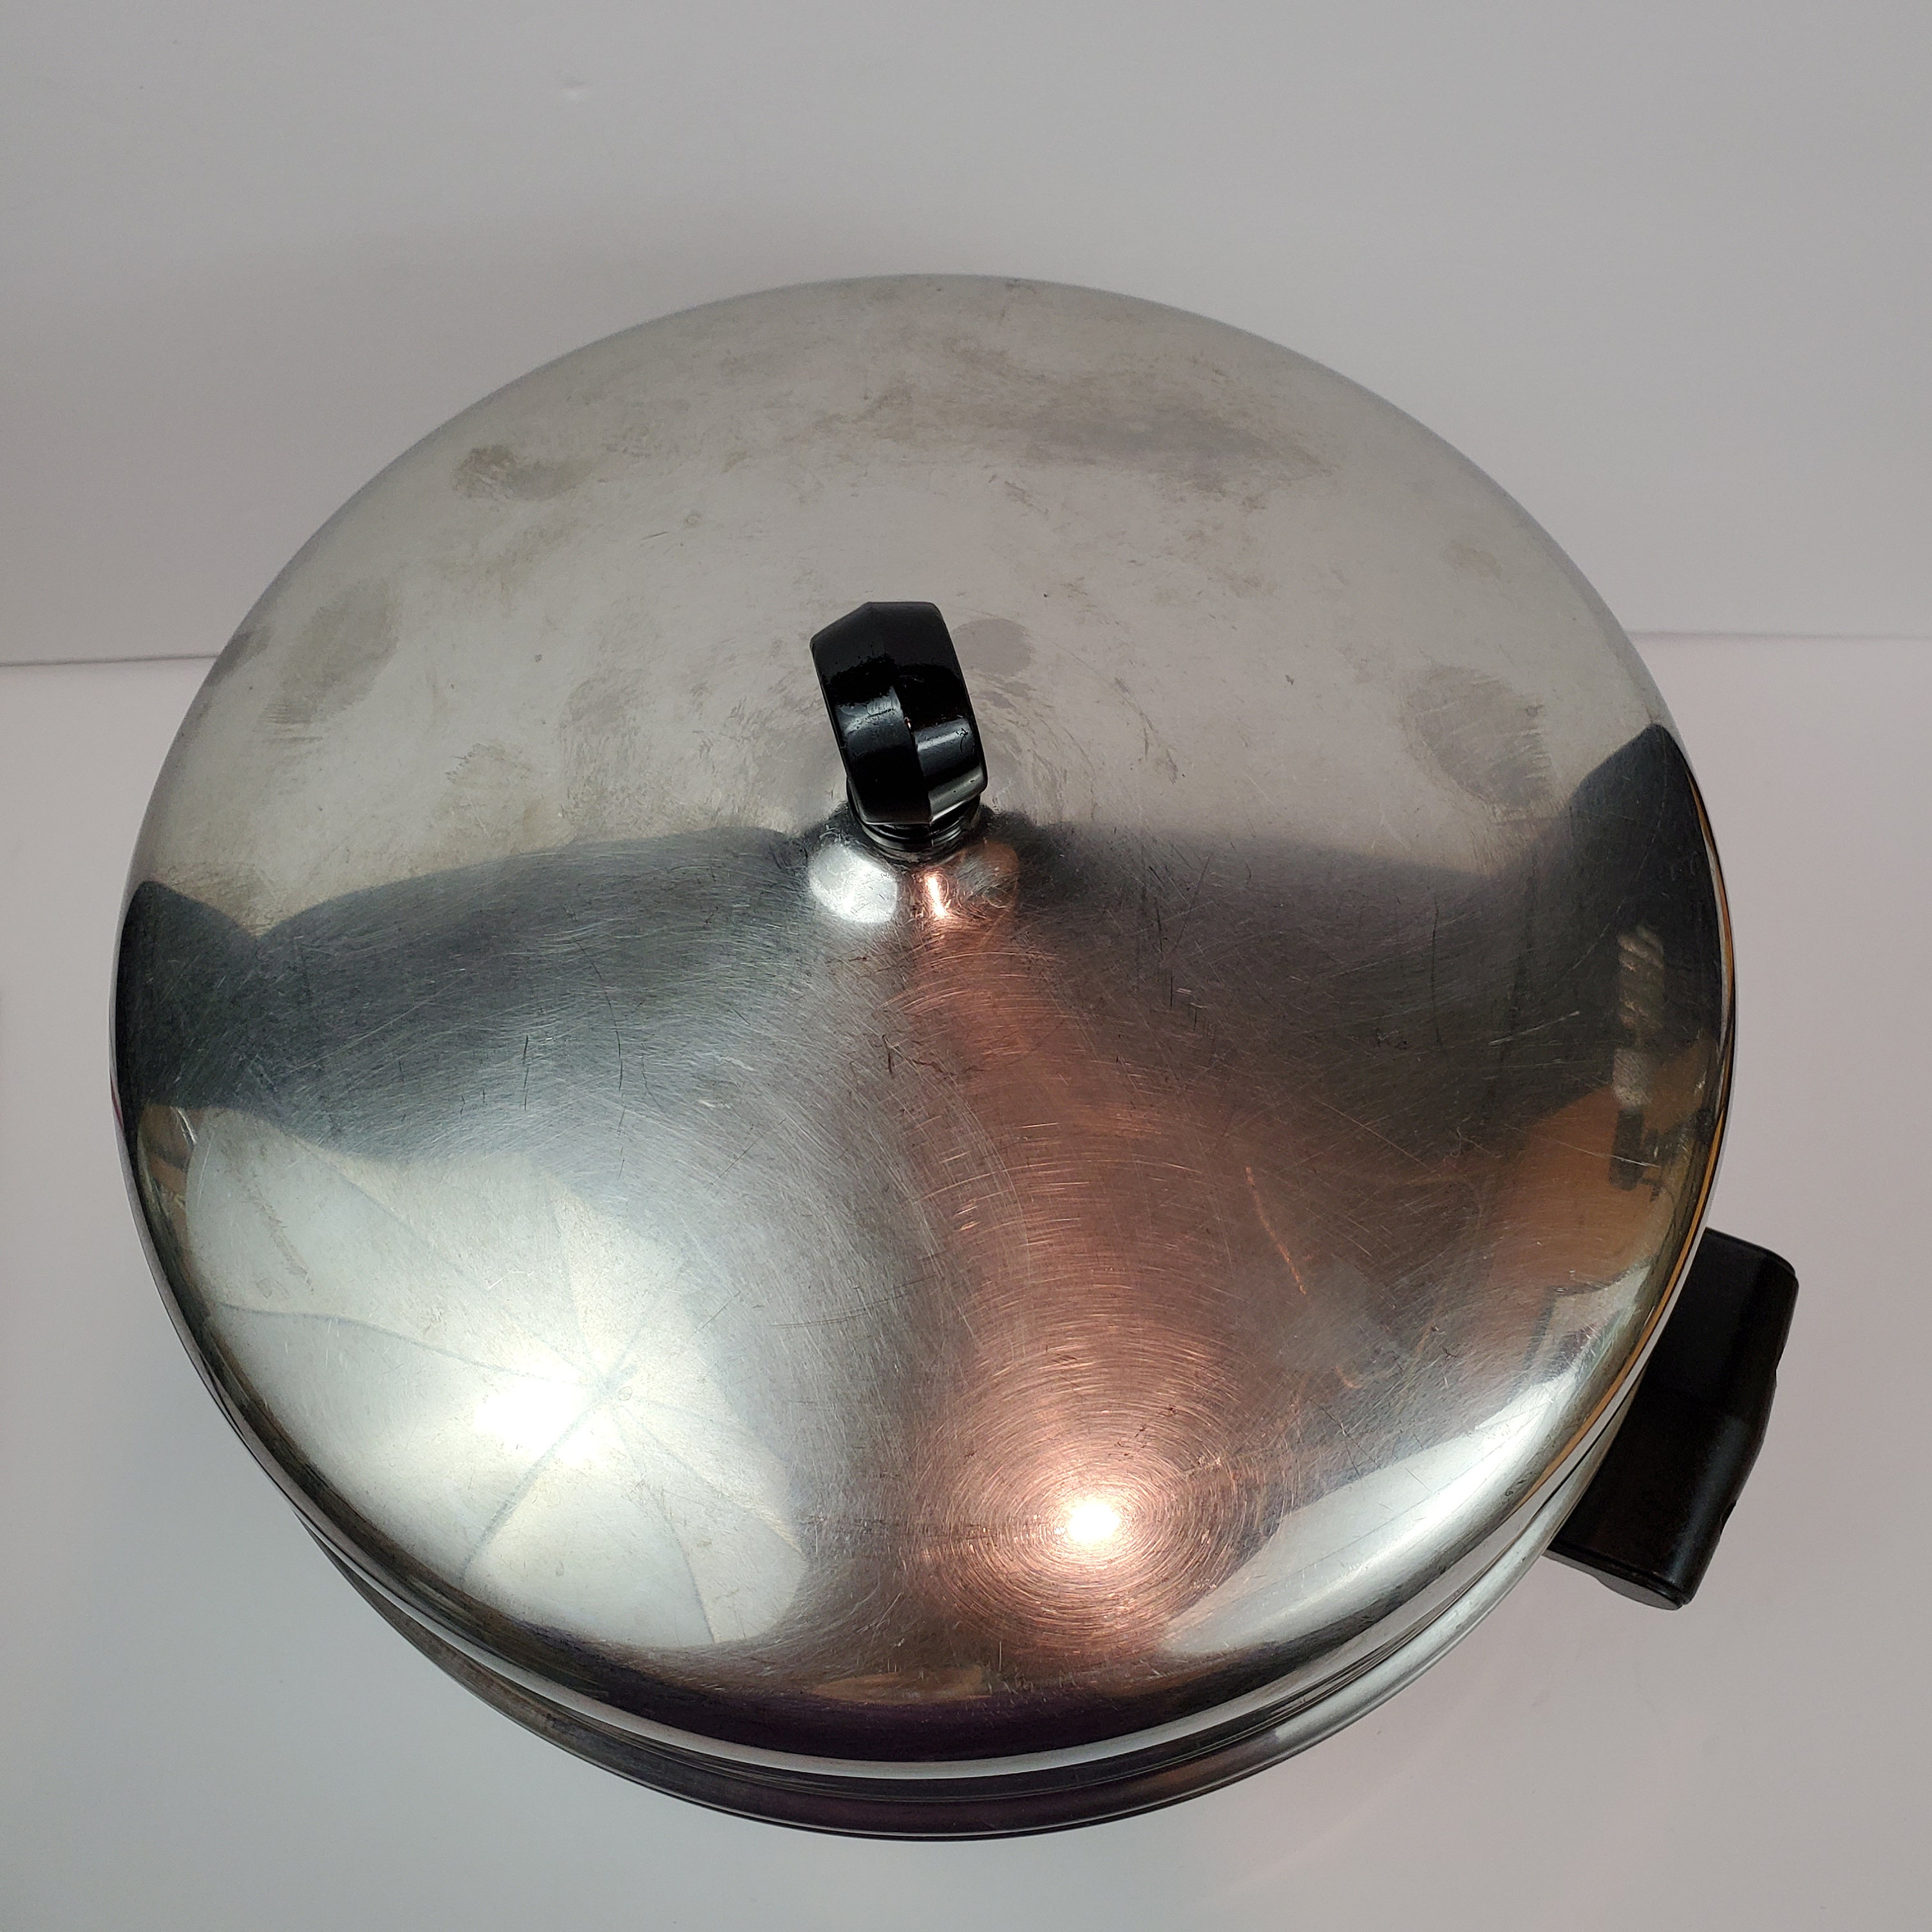 VTG Farberware 6 Quart Sauce Pot W Domed Lid Aluminum Clad Stainless Steel  Made in the USA Made to Last 6 Qt. 